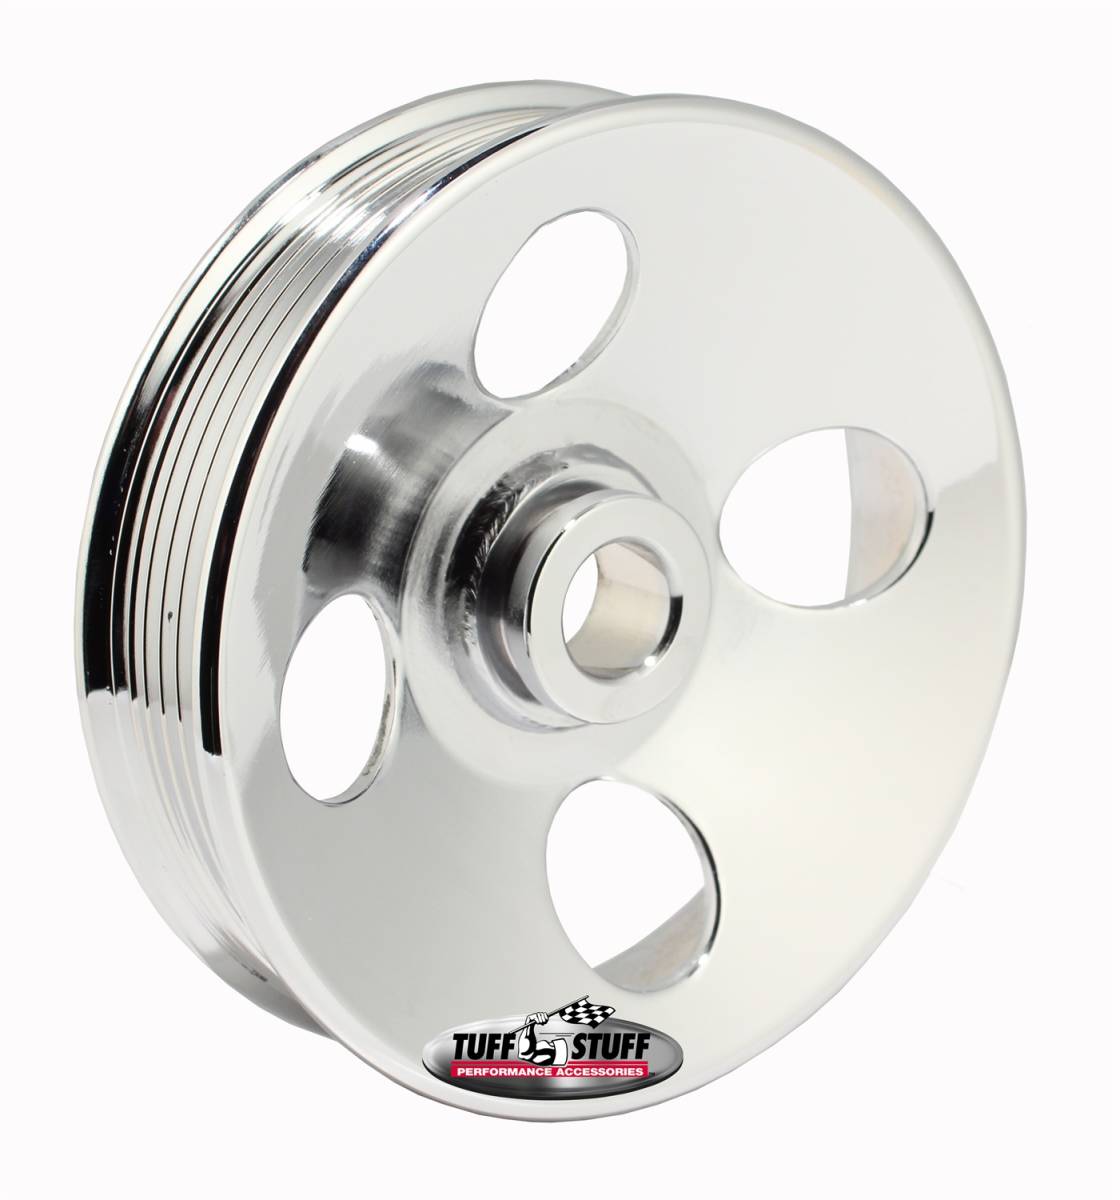 Tuff Stuff Performance - Type II Power Steering Pump Pulley For .663 in. Shaft 6-Groove Fits All Tuff Stuff Type II Pumps That Require A 17mm Press-On Pulley Chrome Plated 8487A